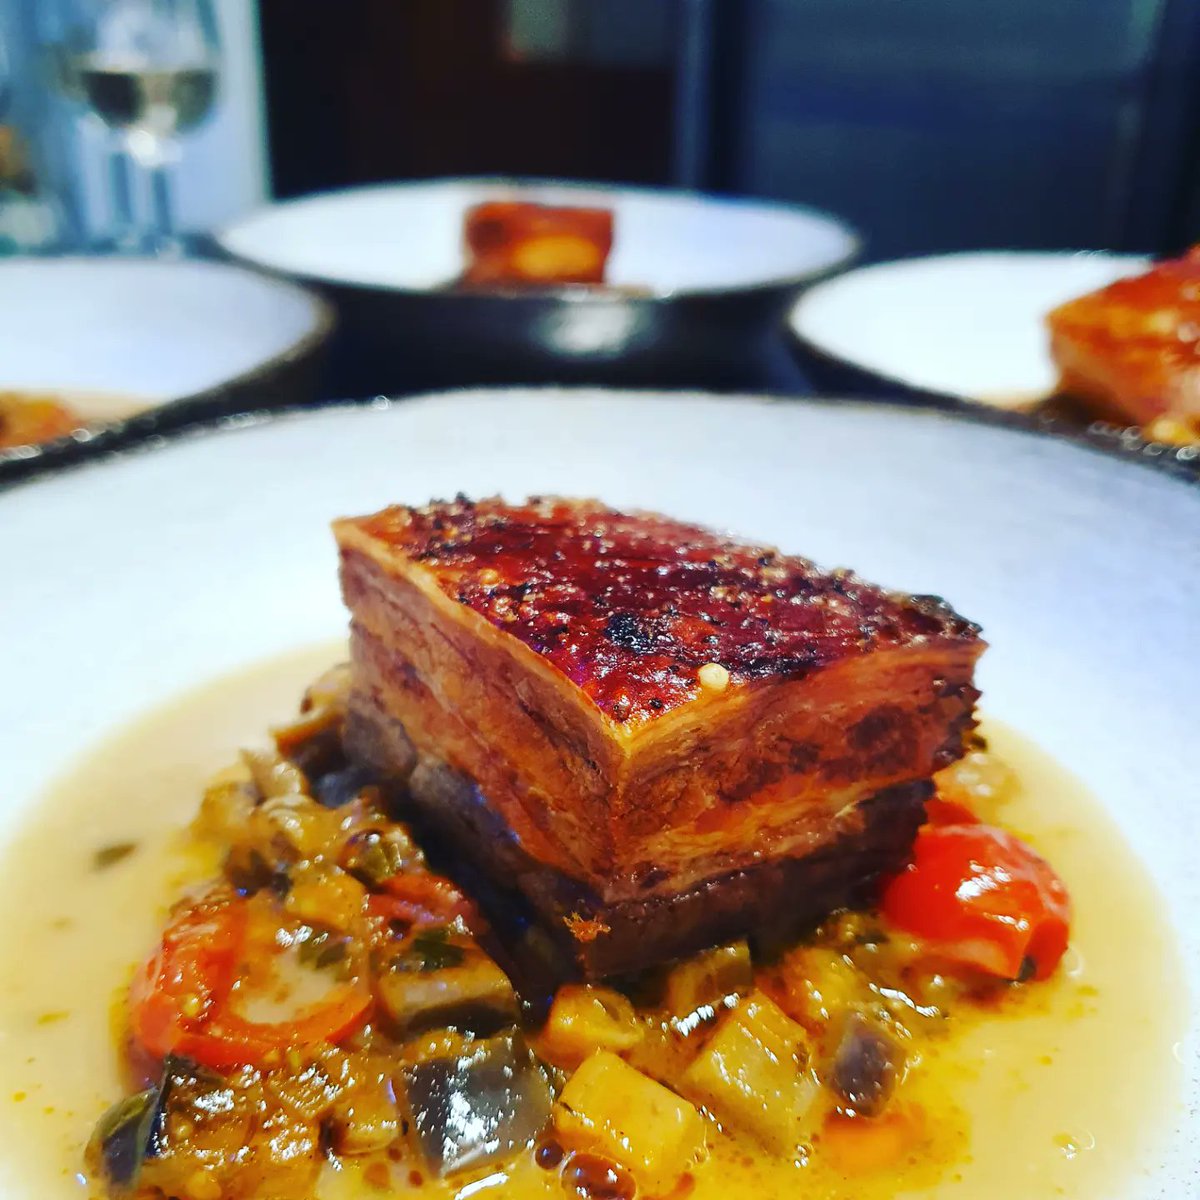 Confit Of @humblepigfarmer pork belly Vindyloo with Marsala aubergine & cherry tom's. Classically French with a Punjabi twist. It's not just knowing how to cook its more about the food trail that leads us to what we deliver to our guests.

#keepinitlocal